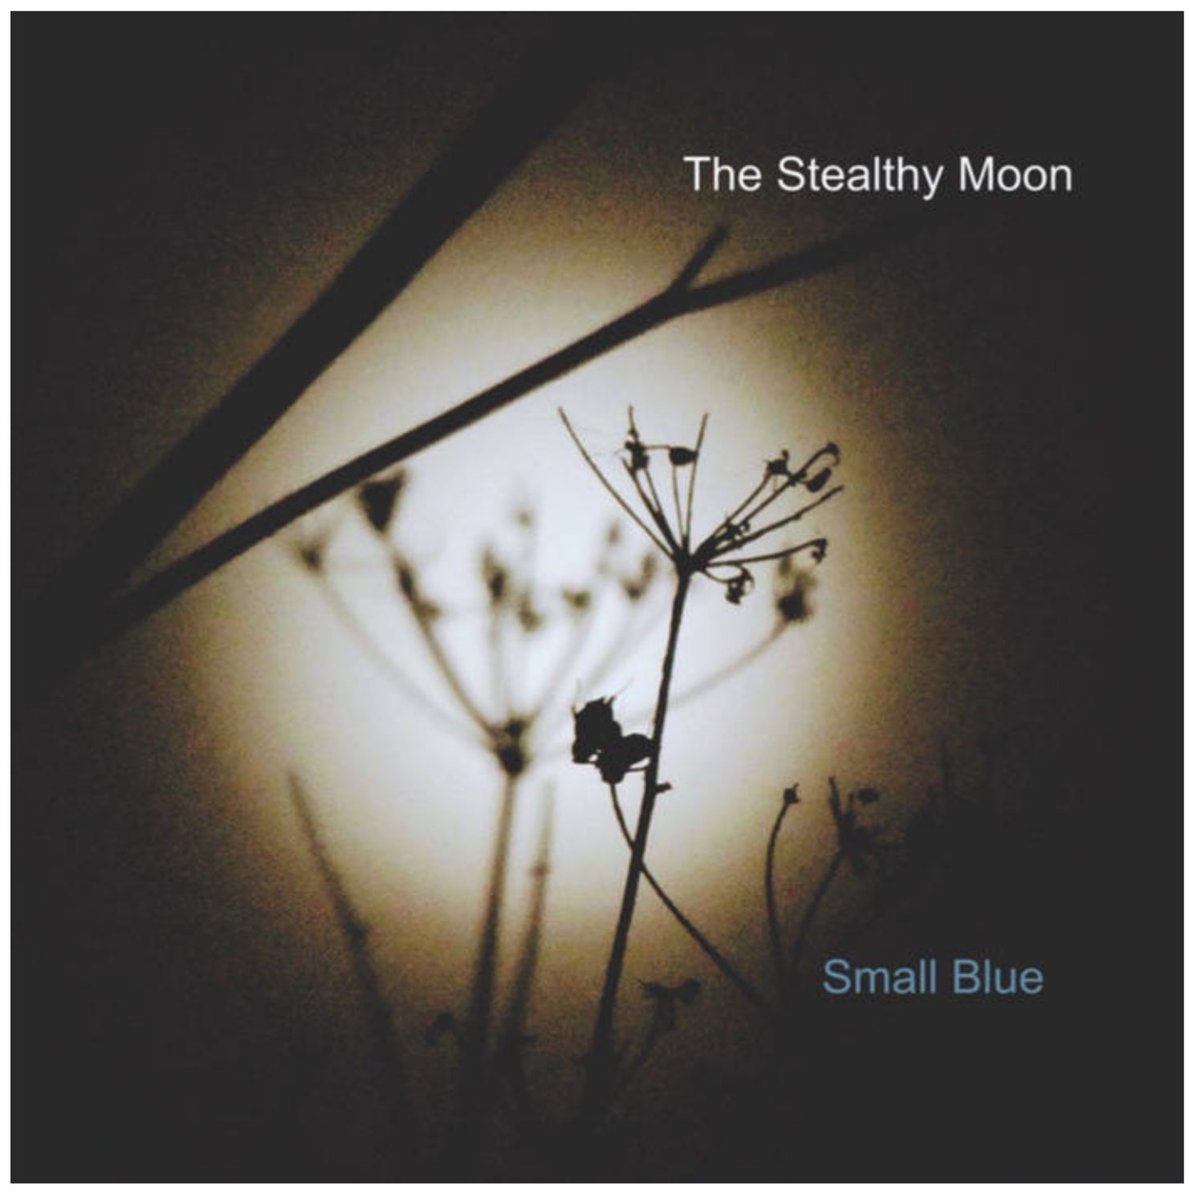 New album out today. The Stealthy Moon by Small Blue. David Beebee piano, Marianne Windham bass, & myself on drums. Twelve of my tunes in an intimate jazz format. Please give it a listen and consider a purchase. martinpyne.bandcamp.com/album/the-stea…